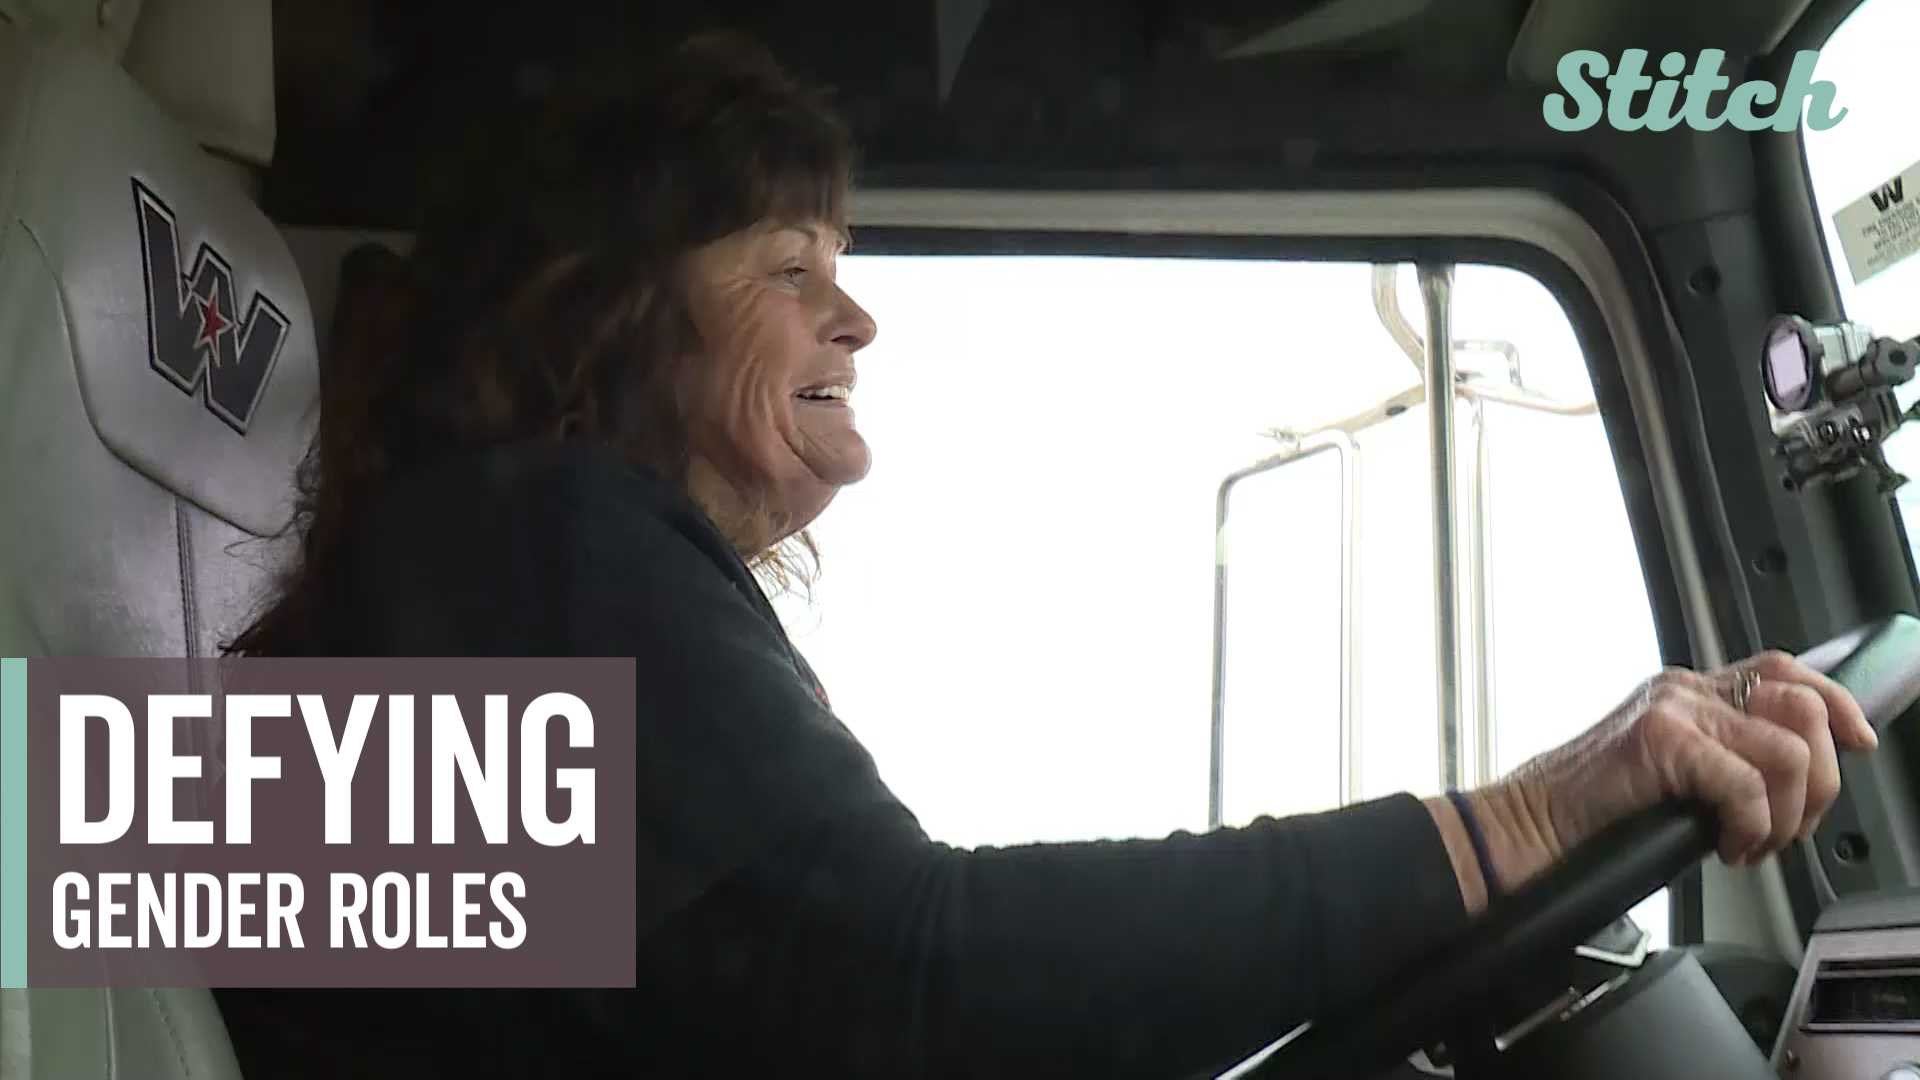 Female garbage truck driver challenges traditional gender roles